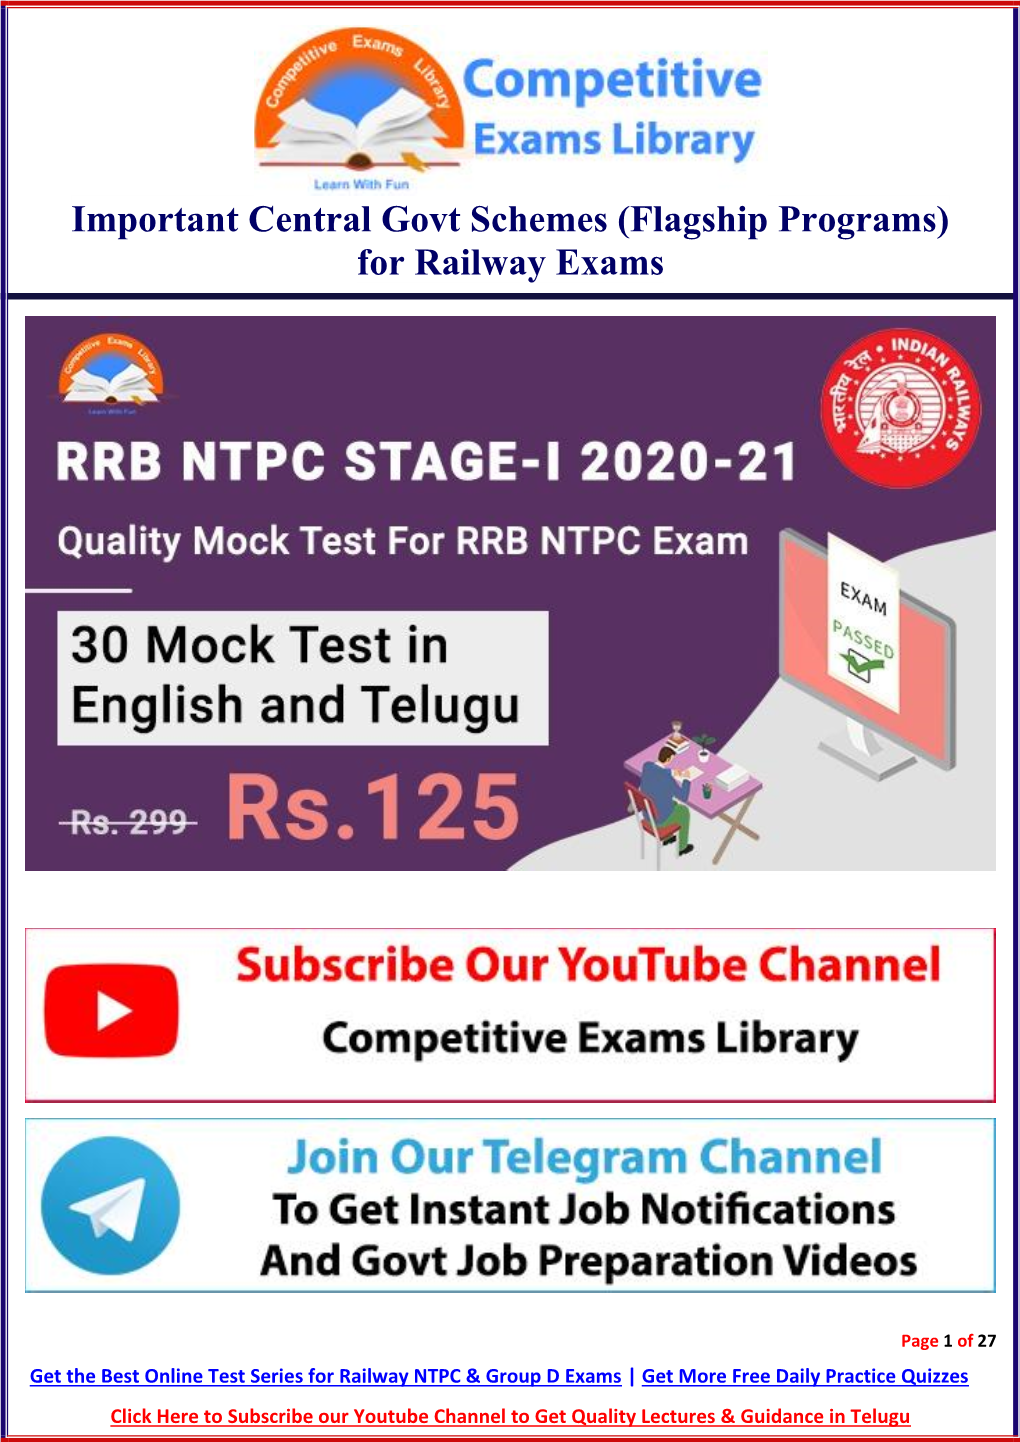 Important Central Govt Schemes (Flagship Programs) for Railway Exams